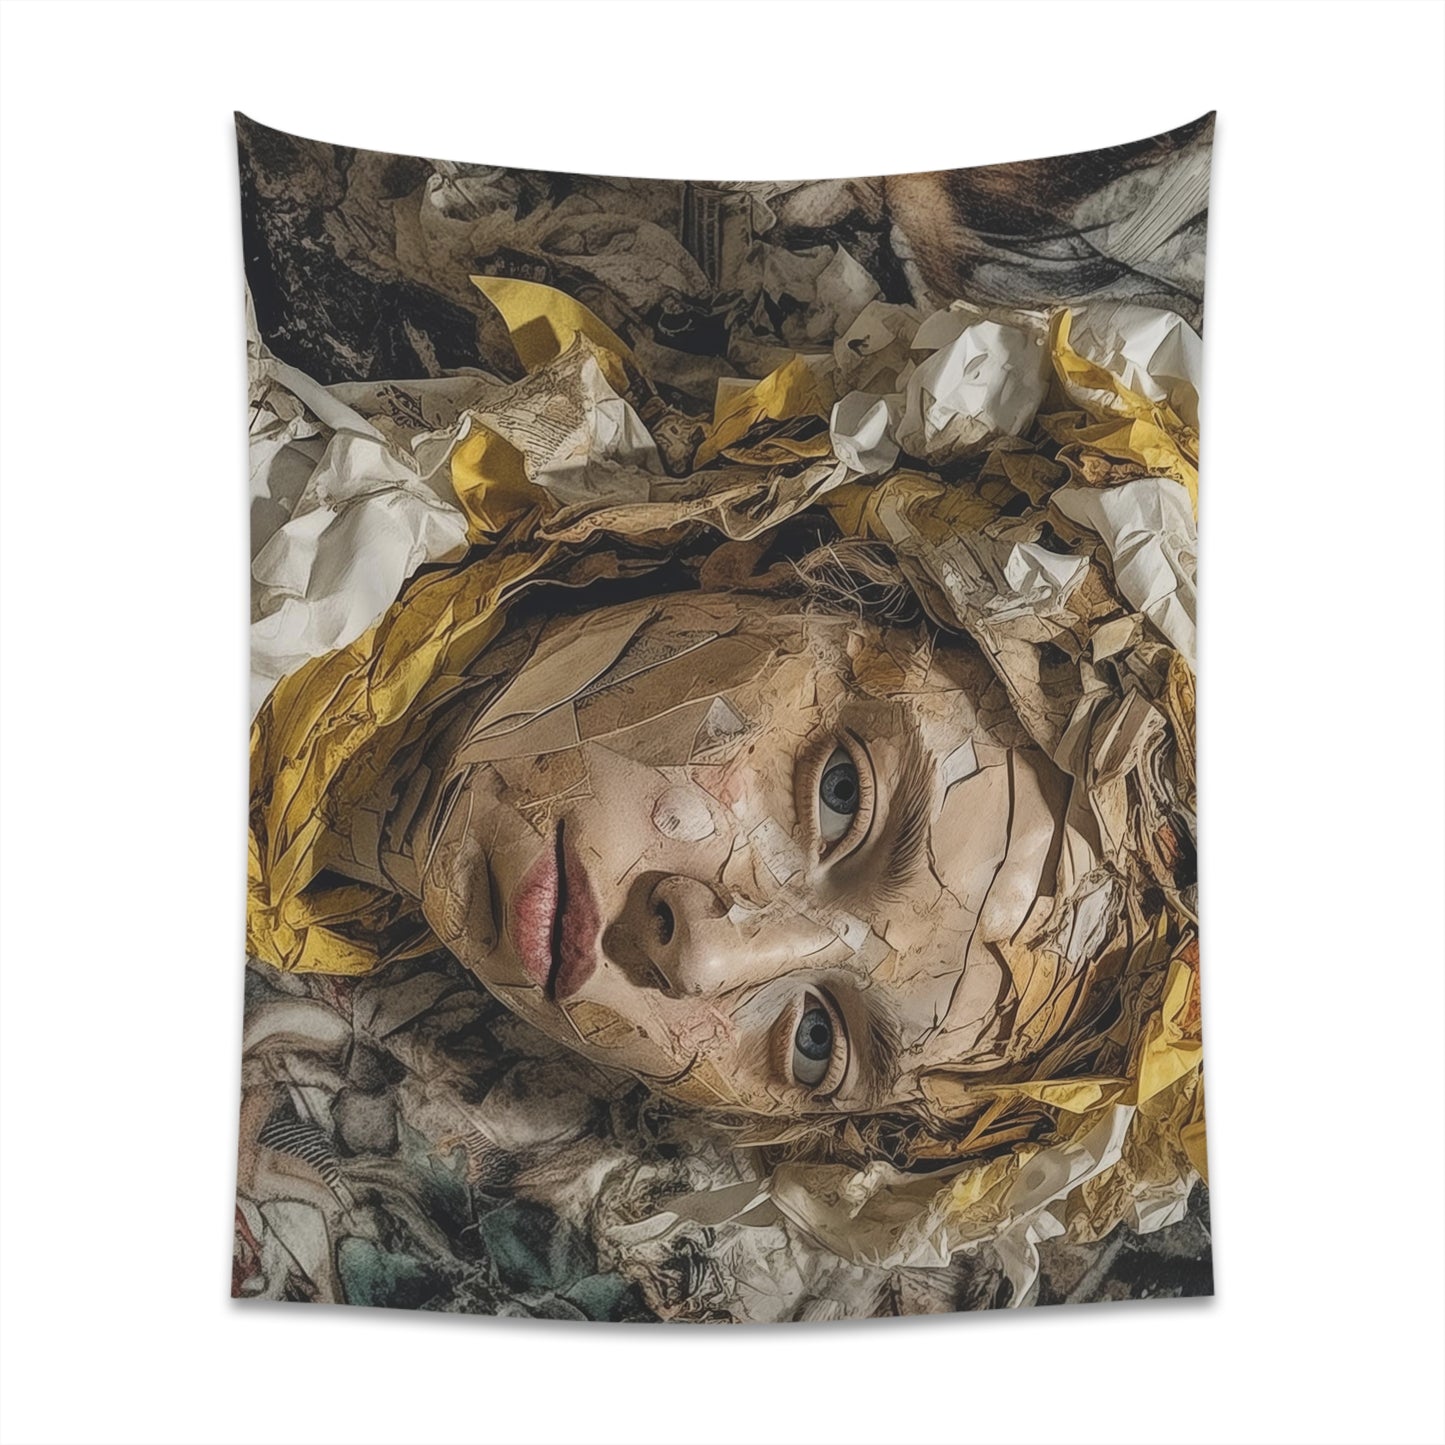 Woven Elegance: Printed Wall Tapestry with Mixed Media and Collage